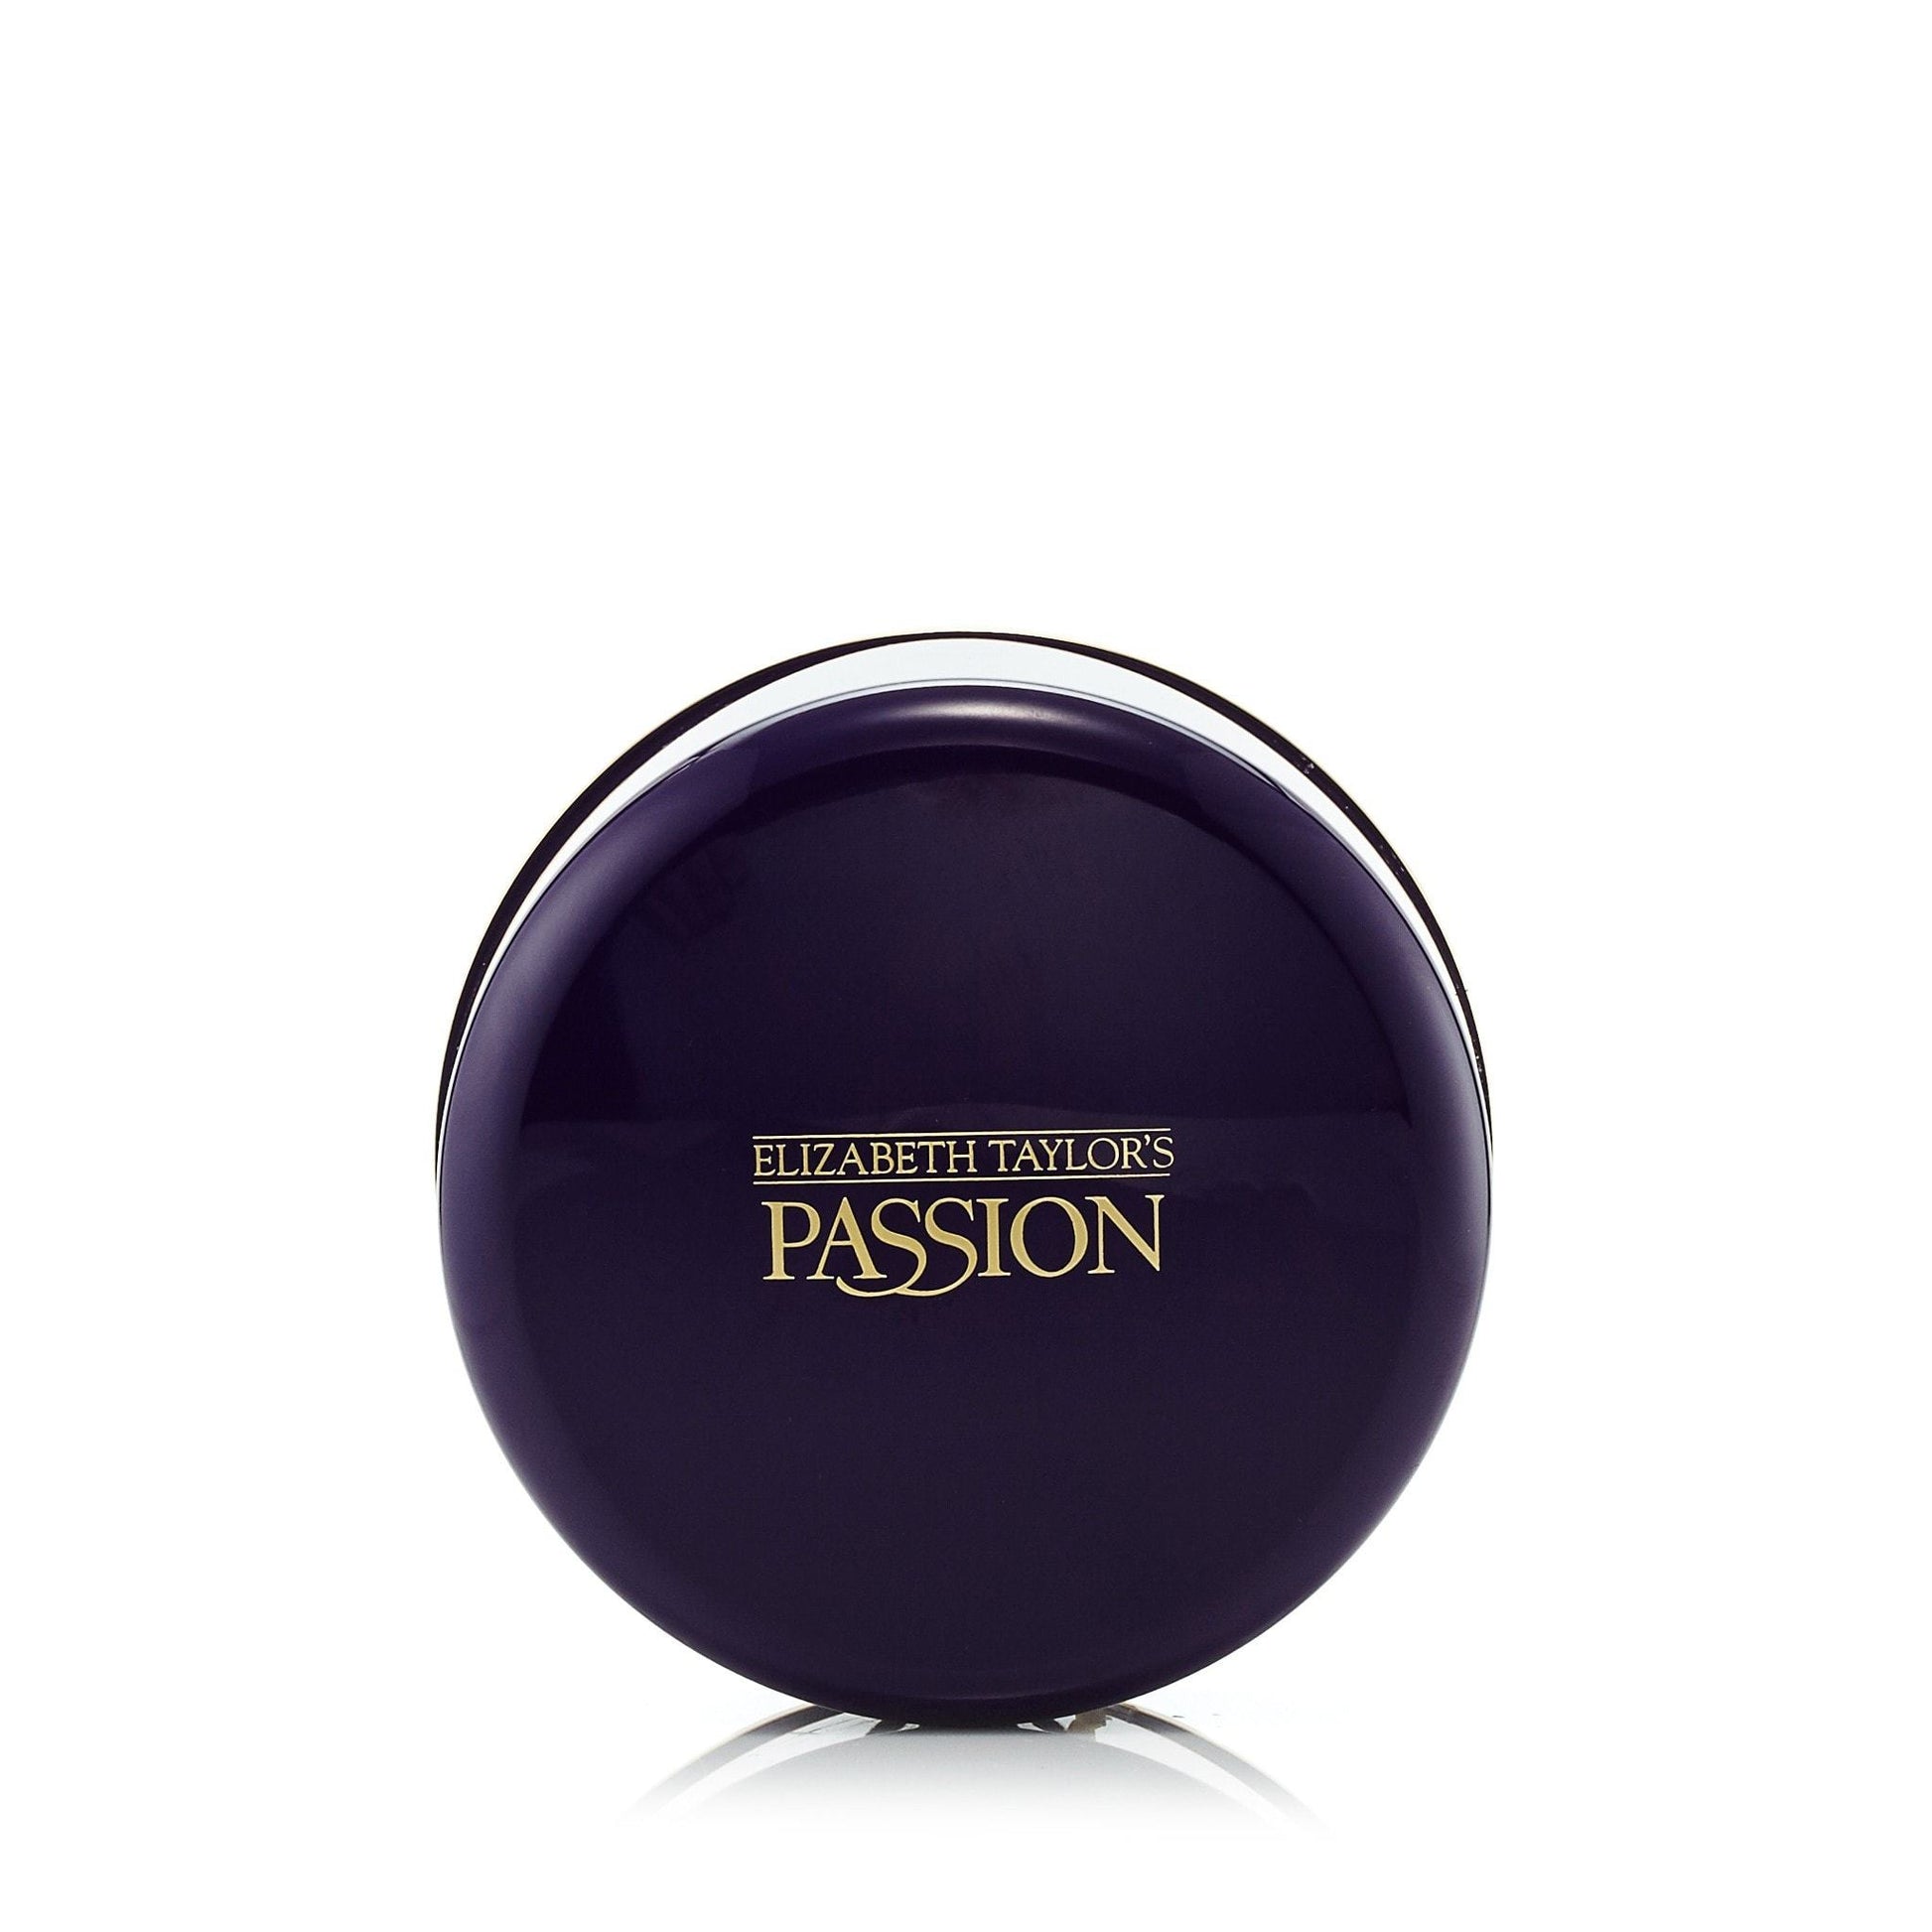 Passion Dusting Powder for Women by Elizabeth Taylor, Product image 4